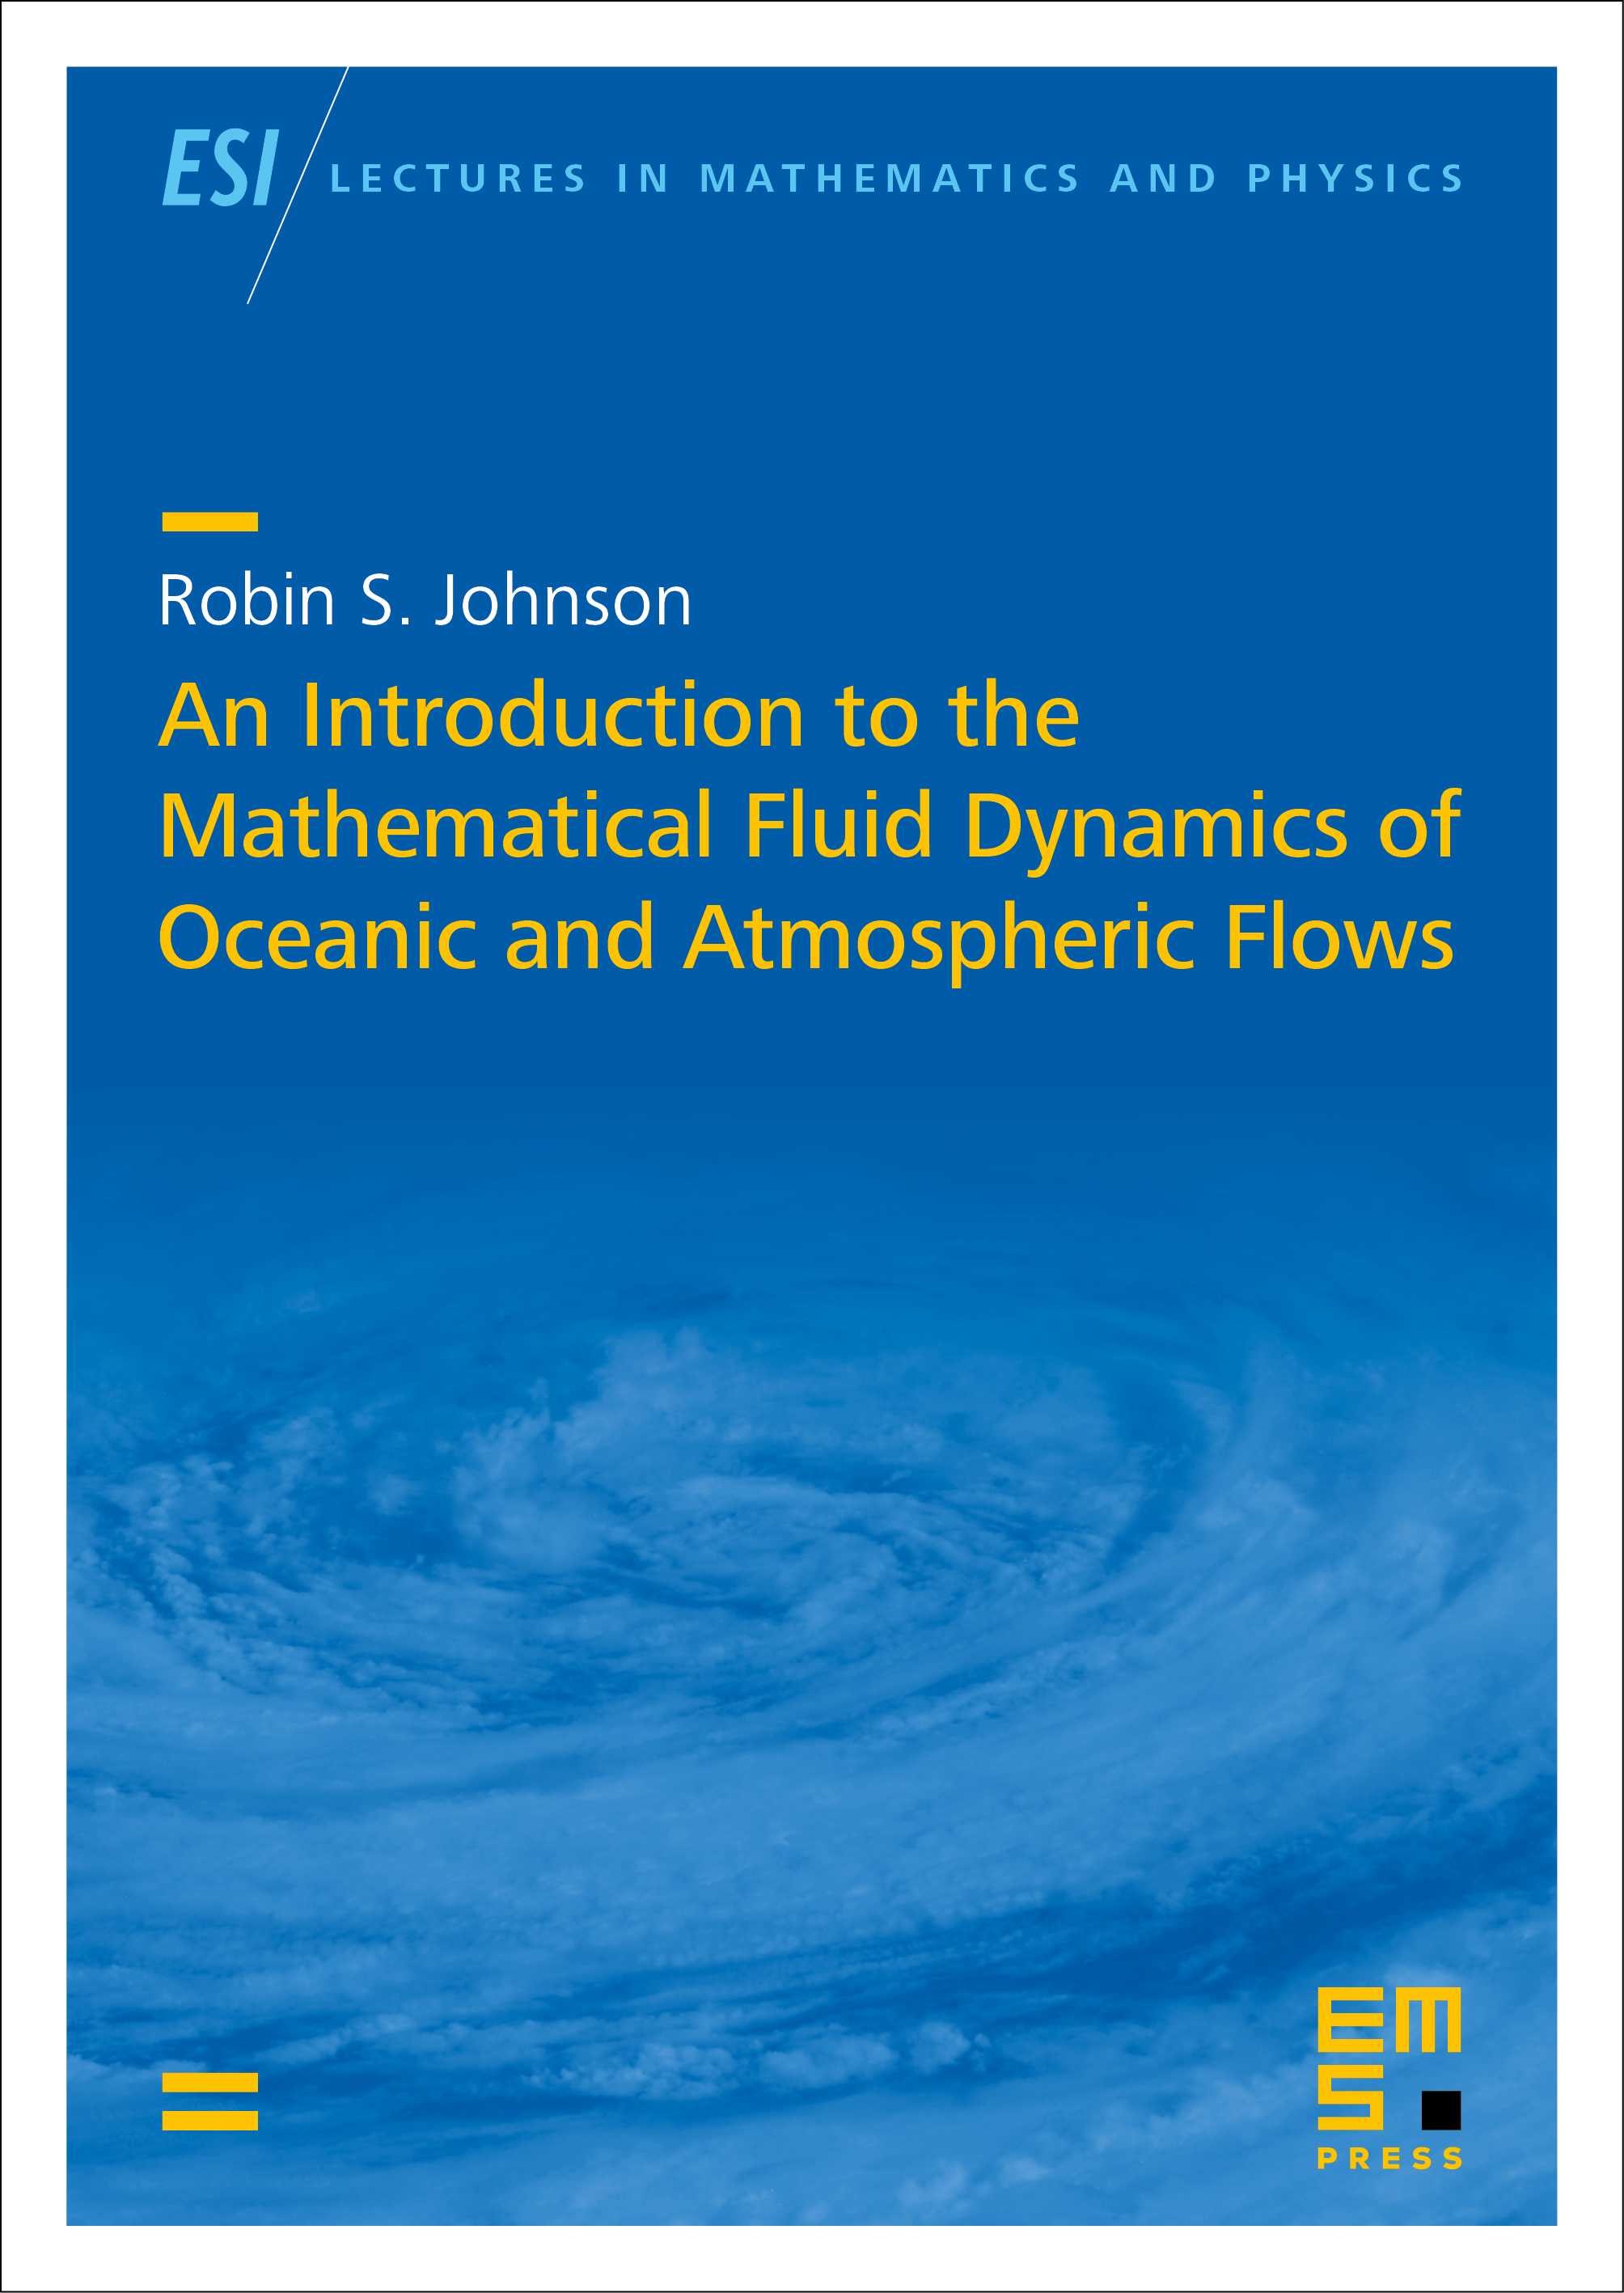 Steady atmospheric flows cover